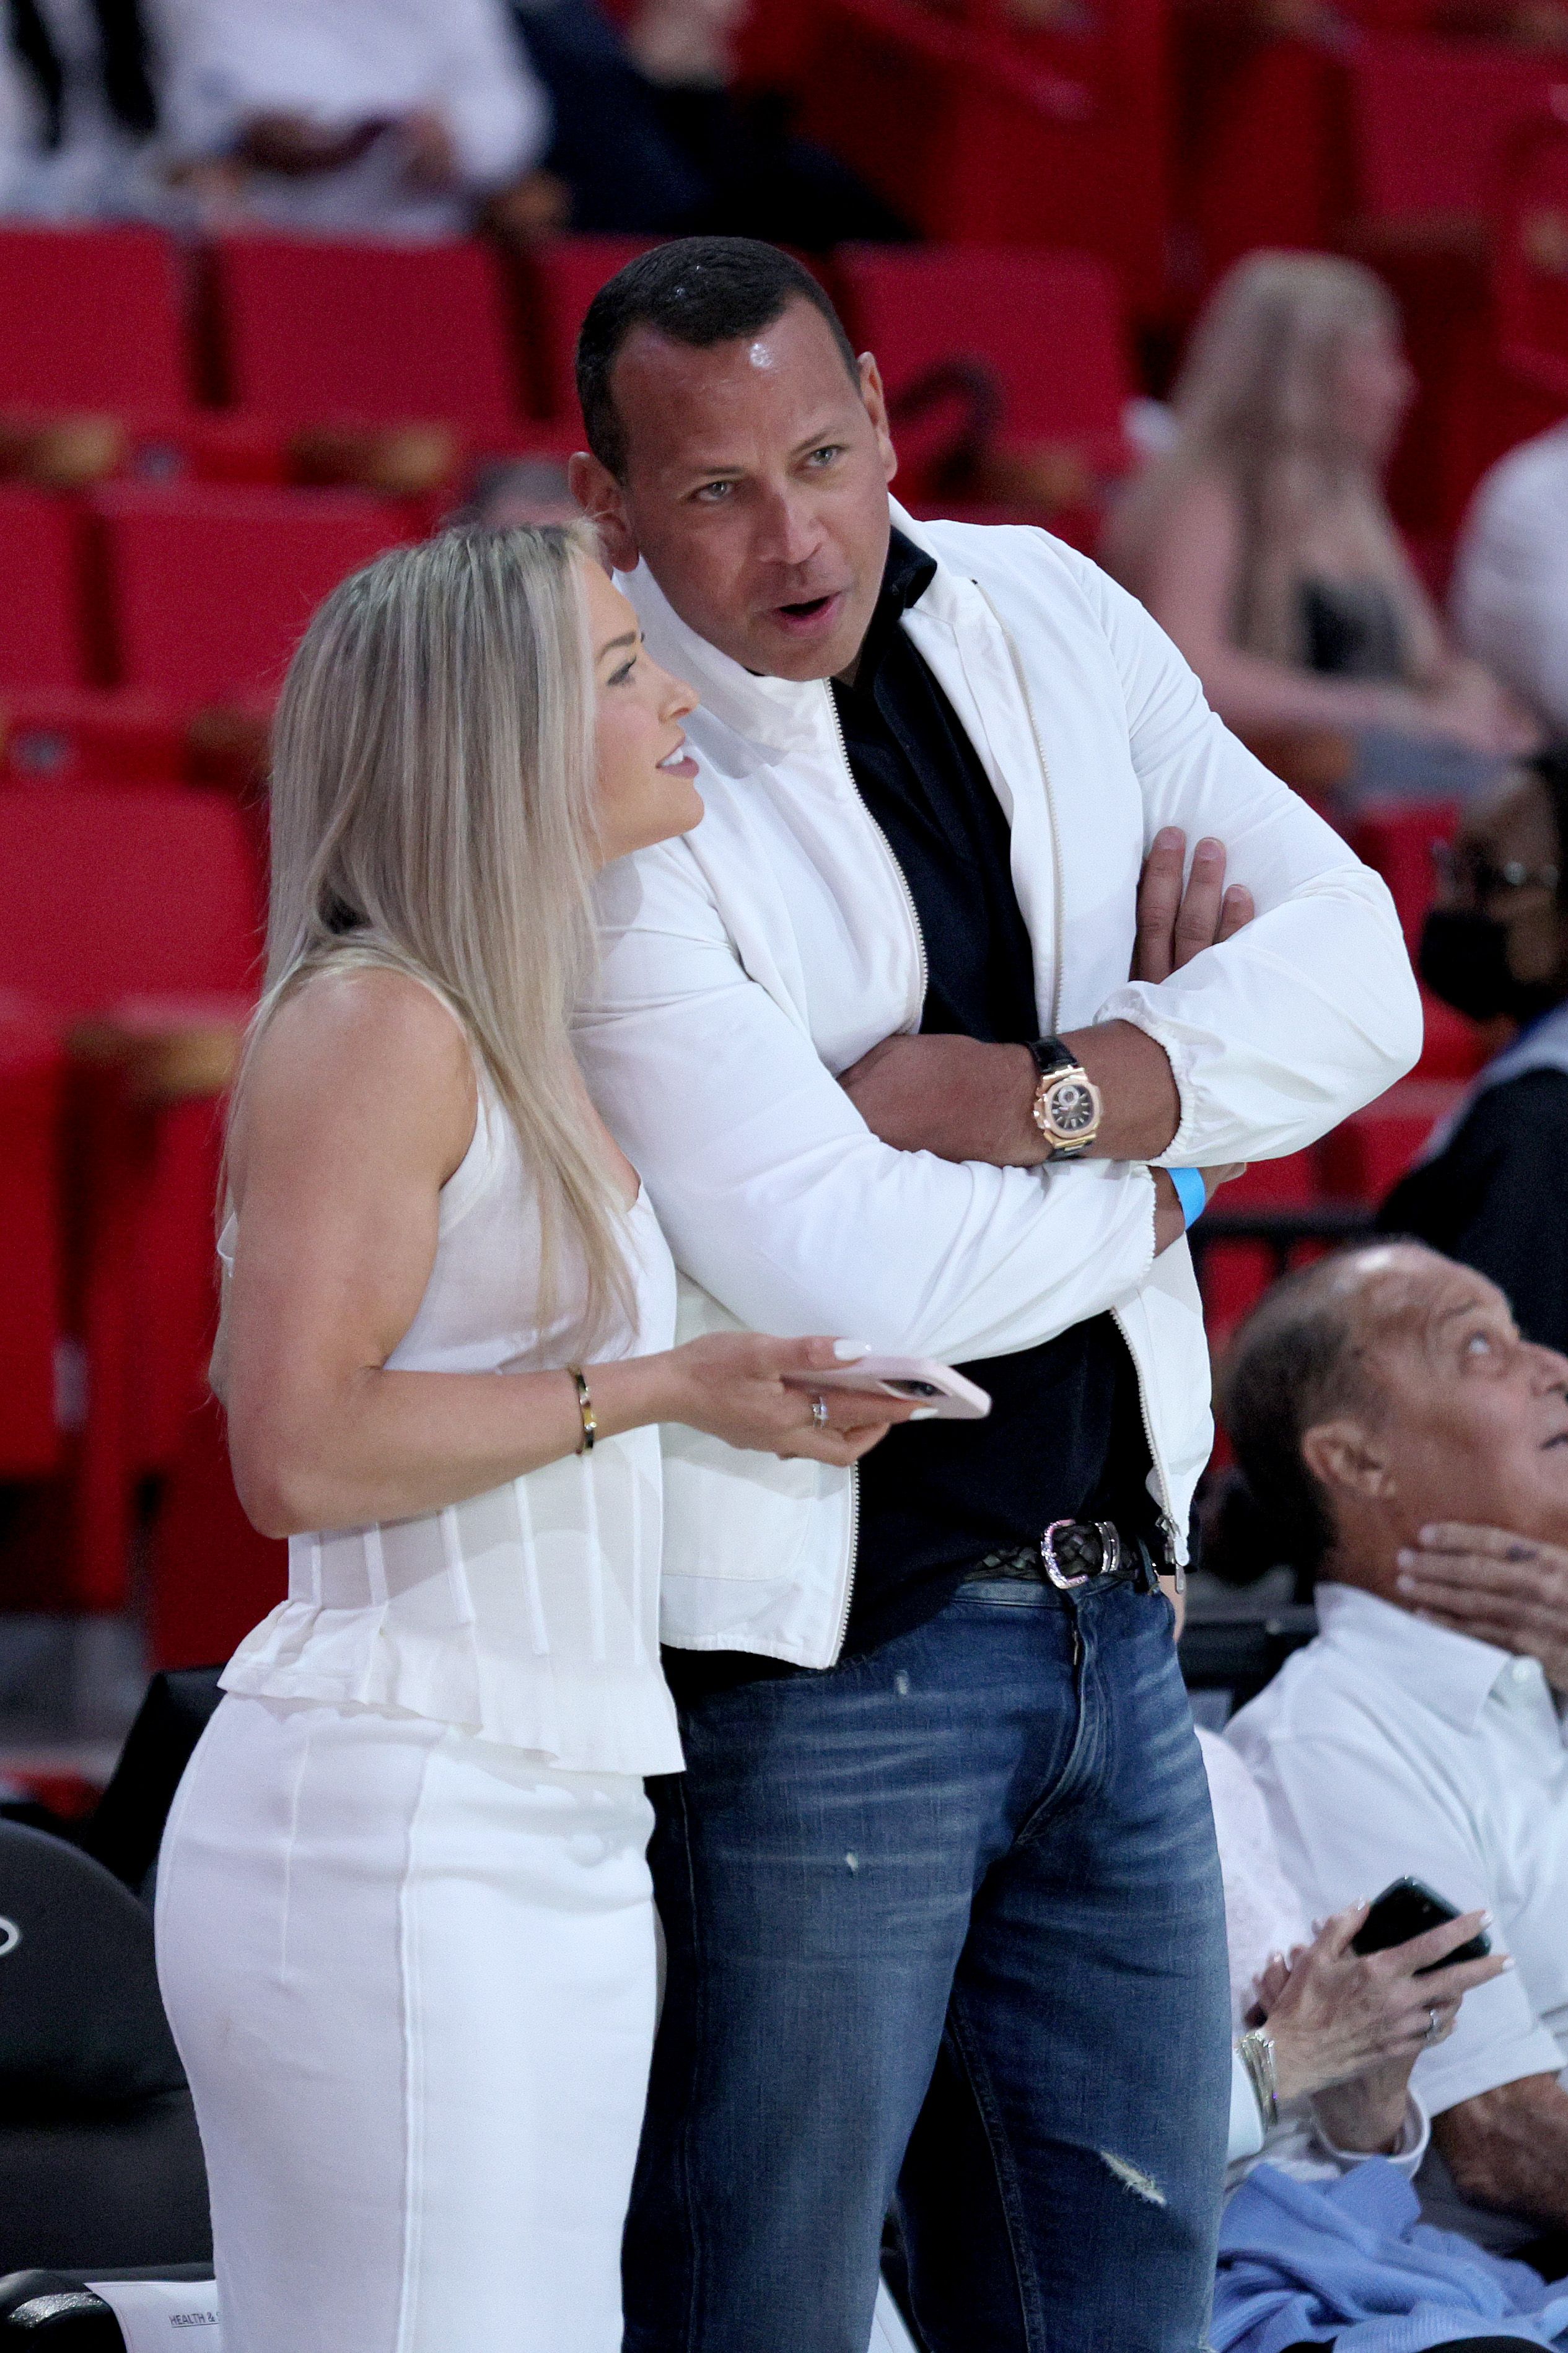 Alex Rodriguez seen with new woman after Kathryne Padgett split